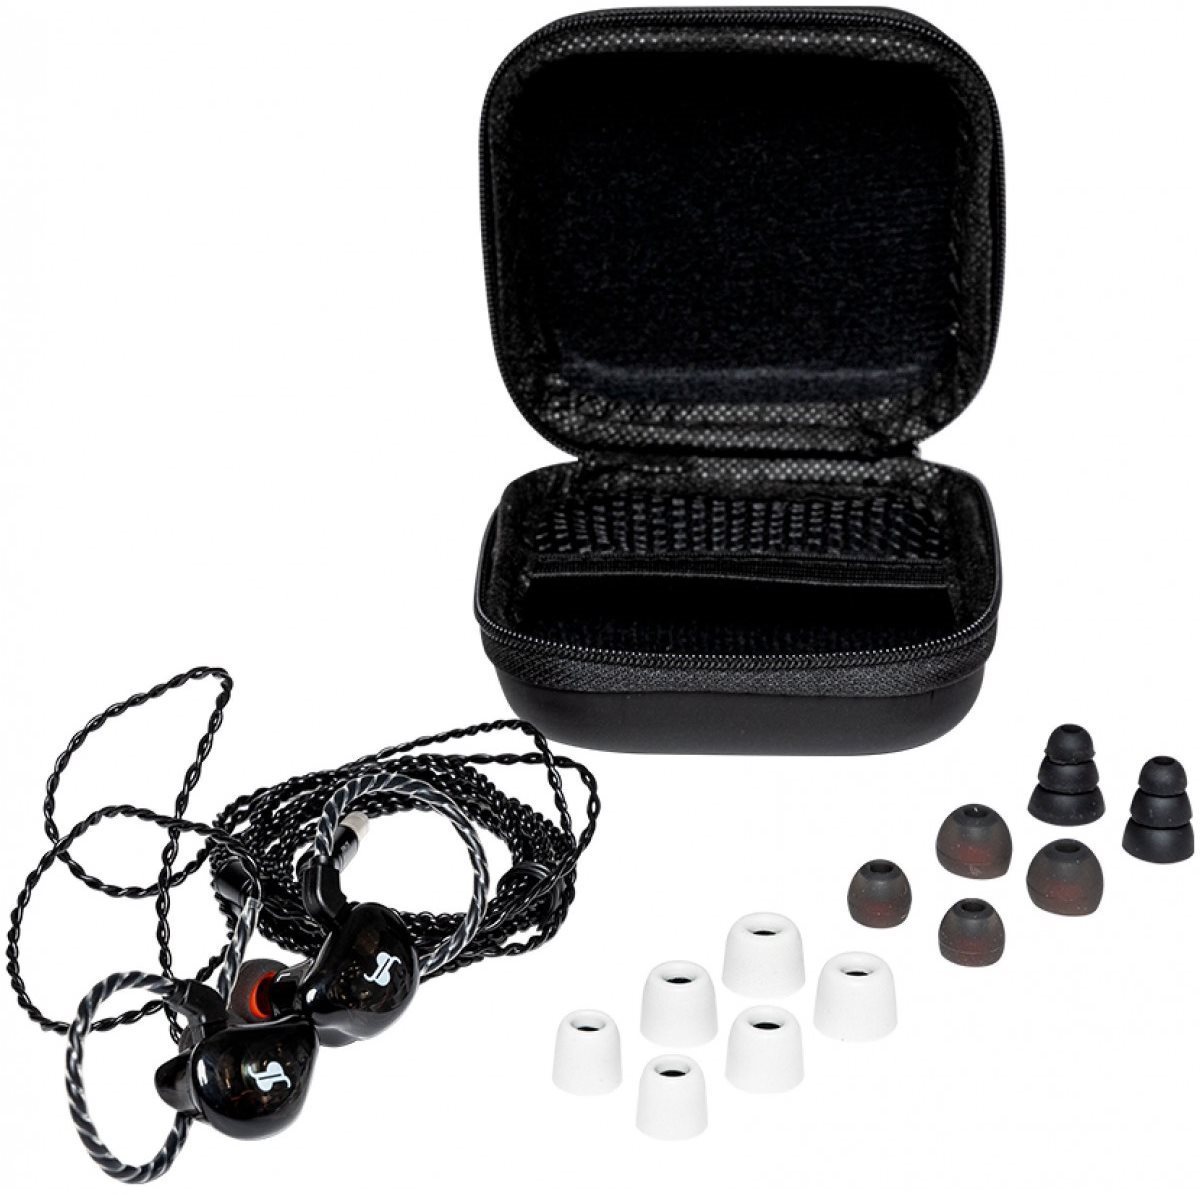 Headphones Stagg SPM-235TR In-Ear Package content